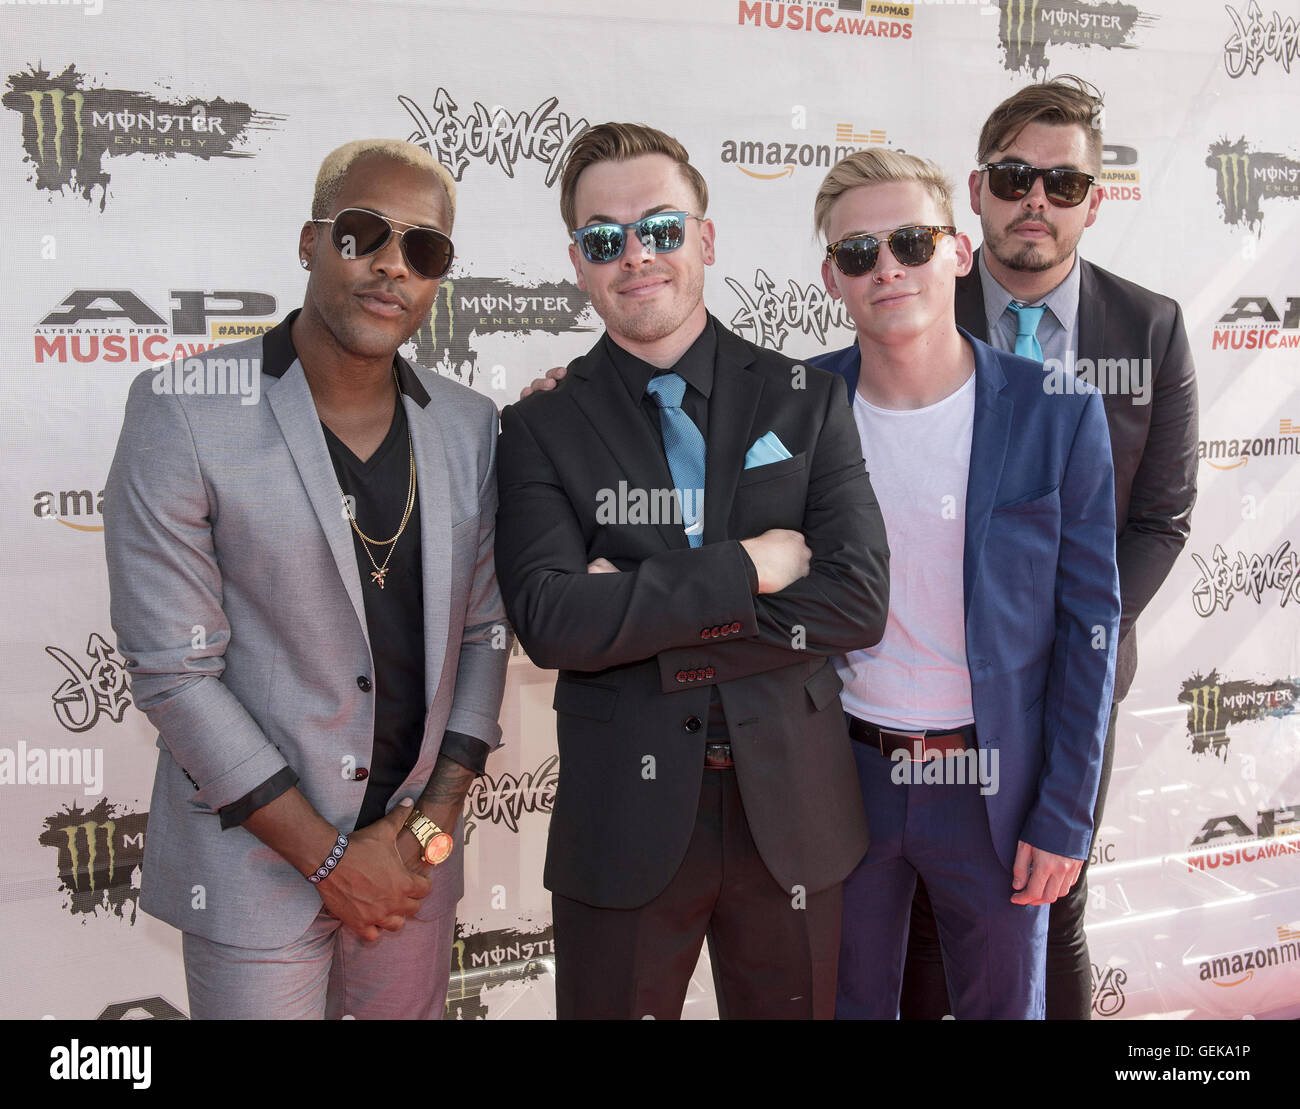 April 26, 2015 - Columbus, OH, United States - 18 July 2016 - Columbus,  Ohio - Dan Clermont, Cody Carson, Maxx Danziger and Zach DeWall of the band  SET IT OFF attend